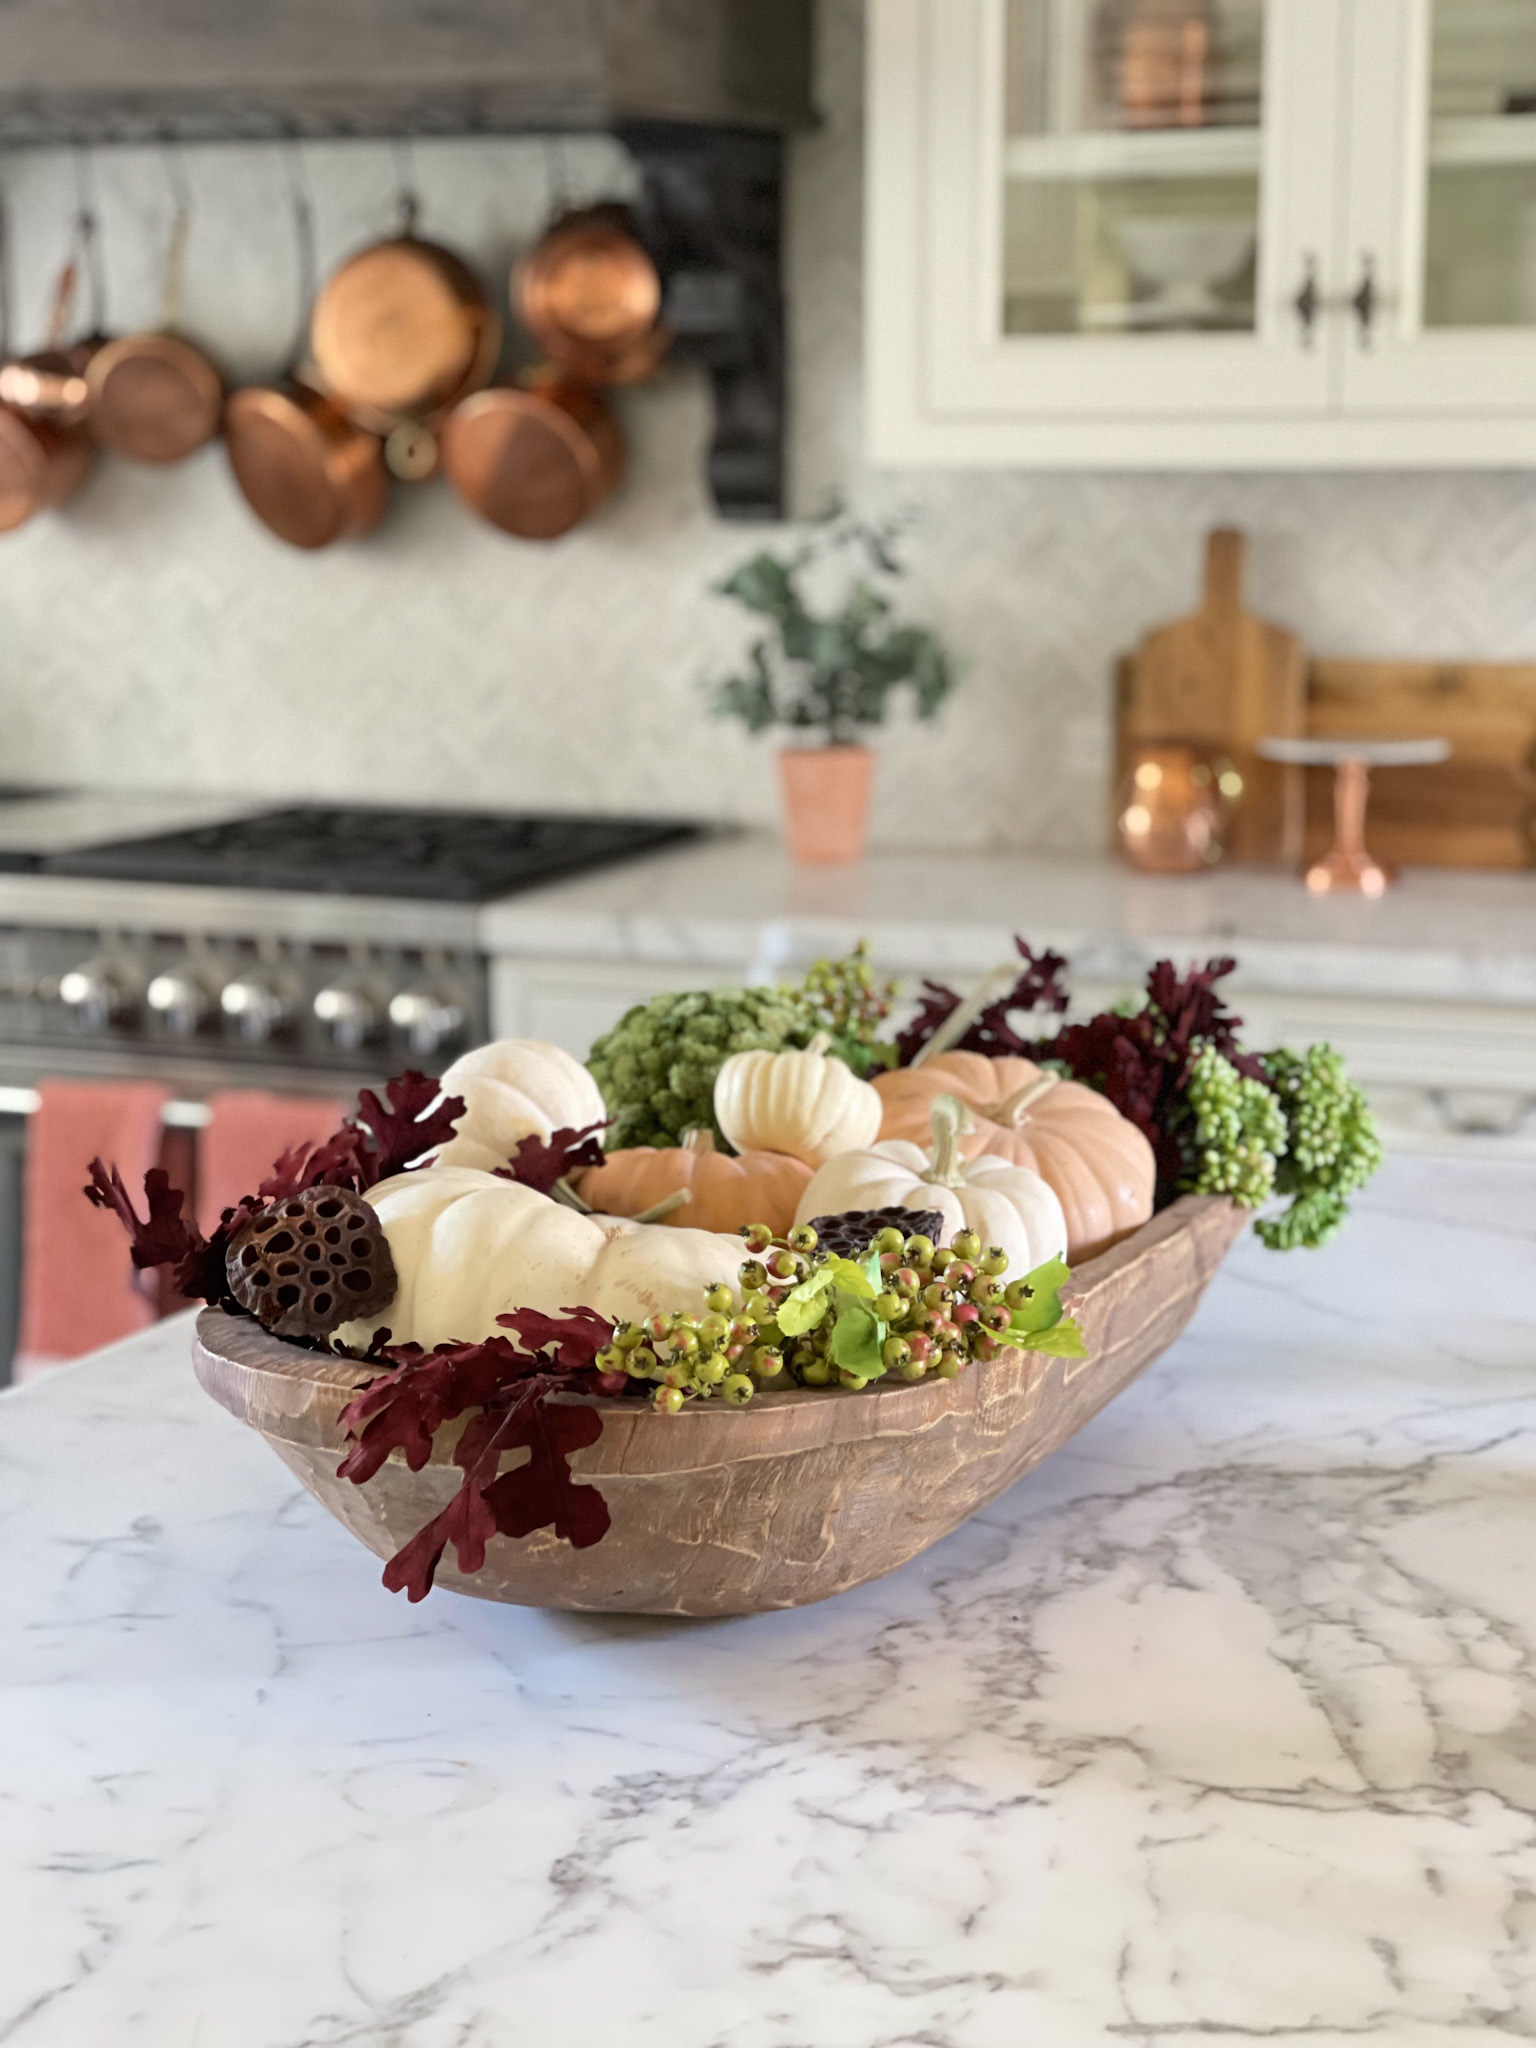 How To Style A Dough Bowl For Every Season - Sanctuary Home Decor